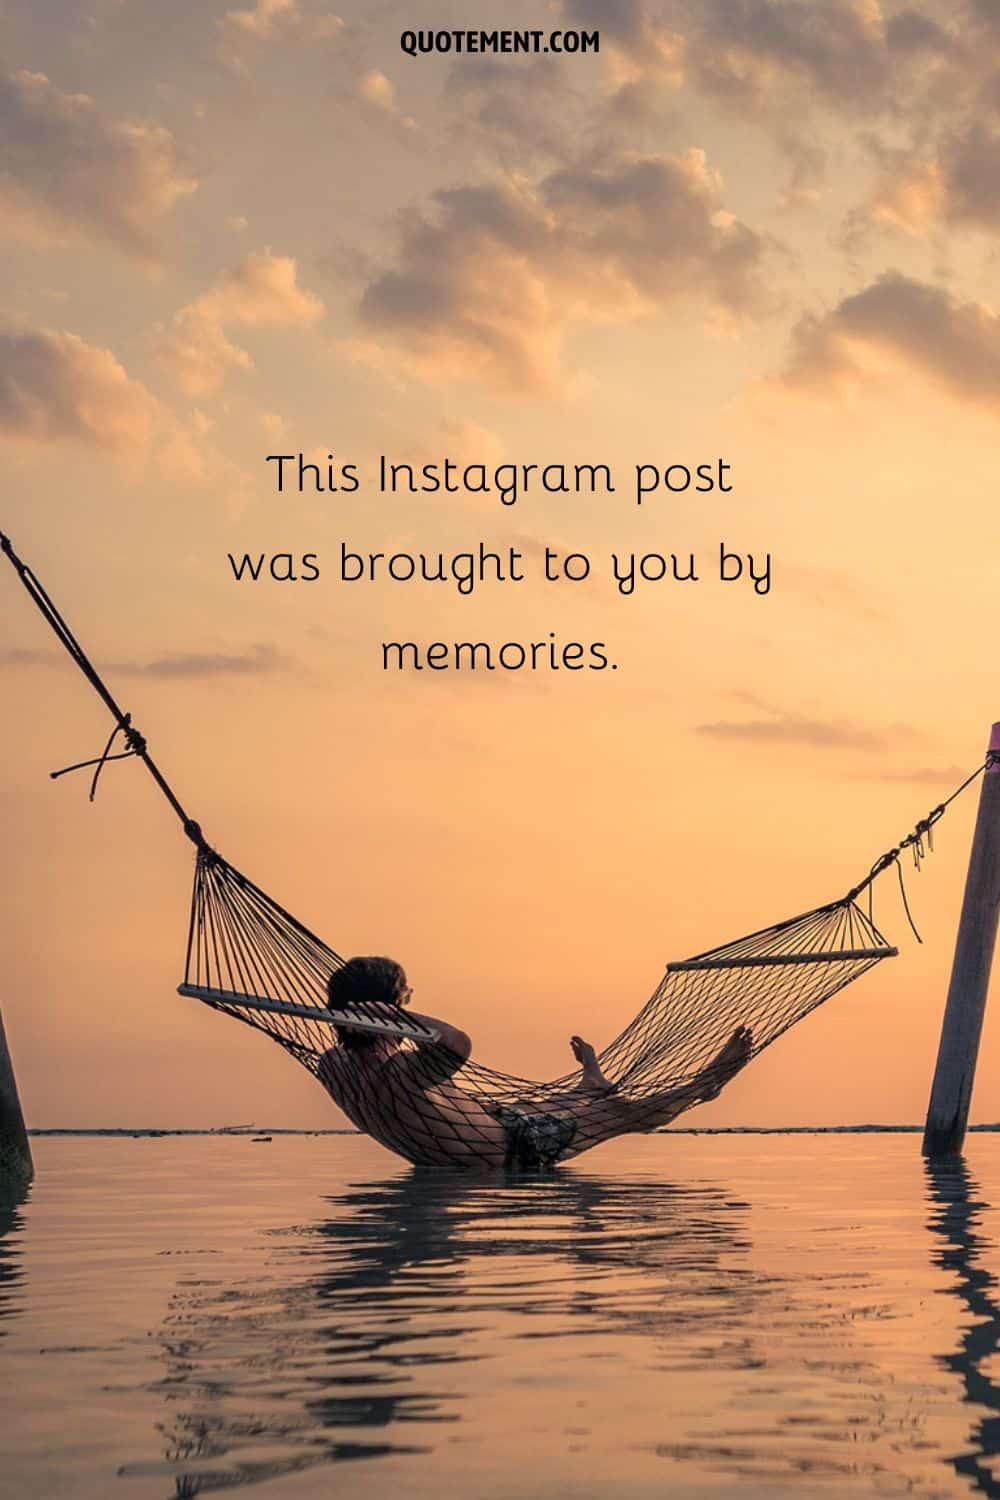 This Instagram post was brought to you by memories.
